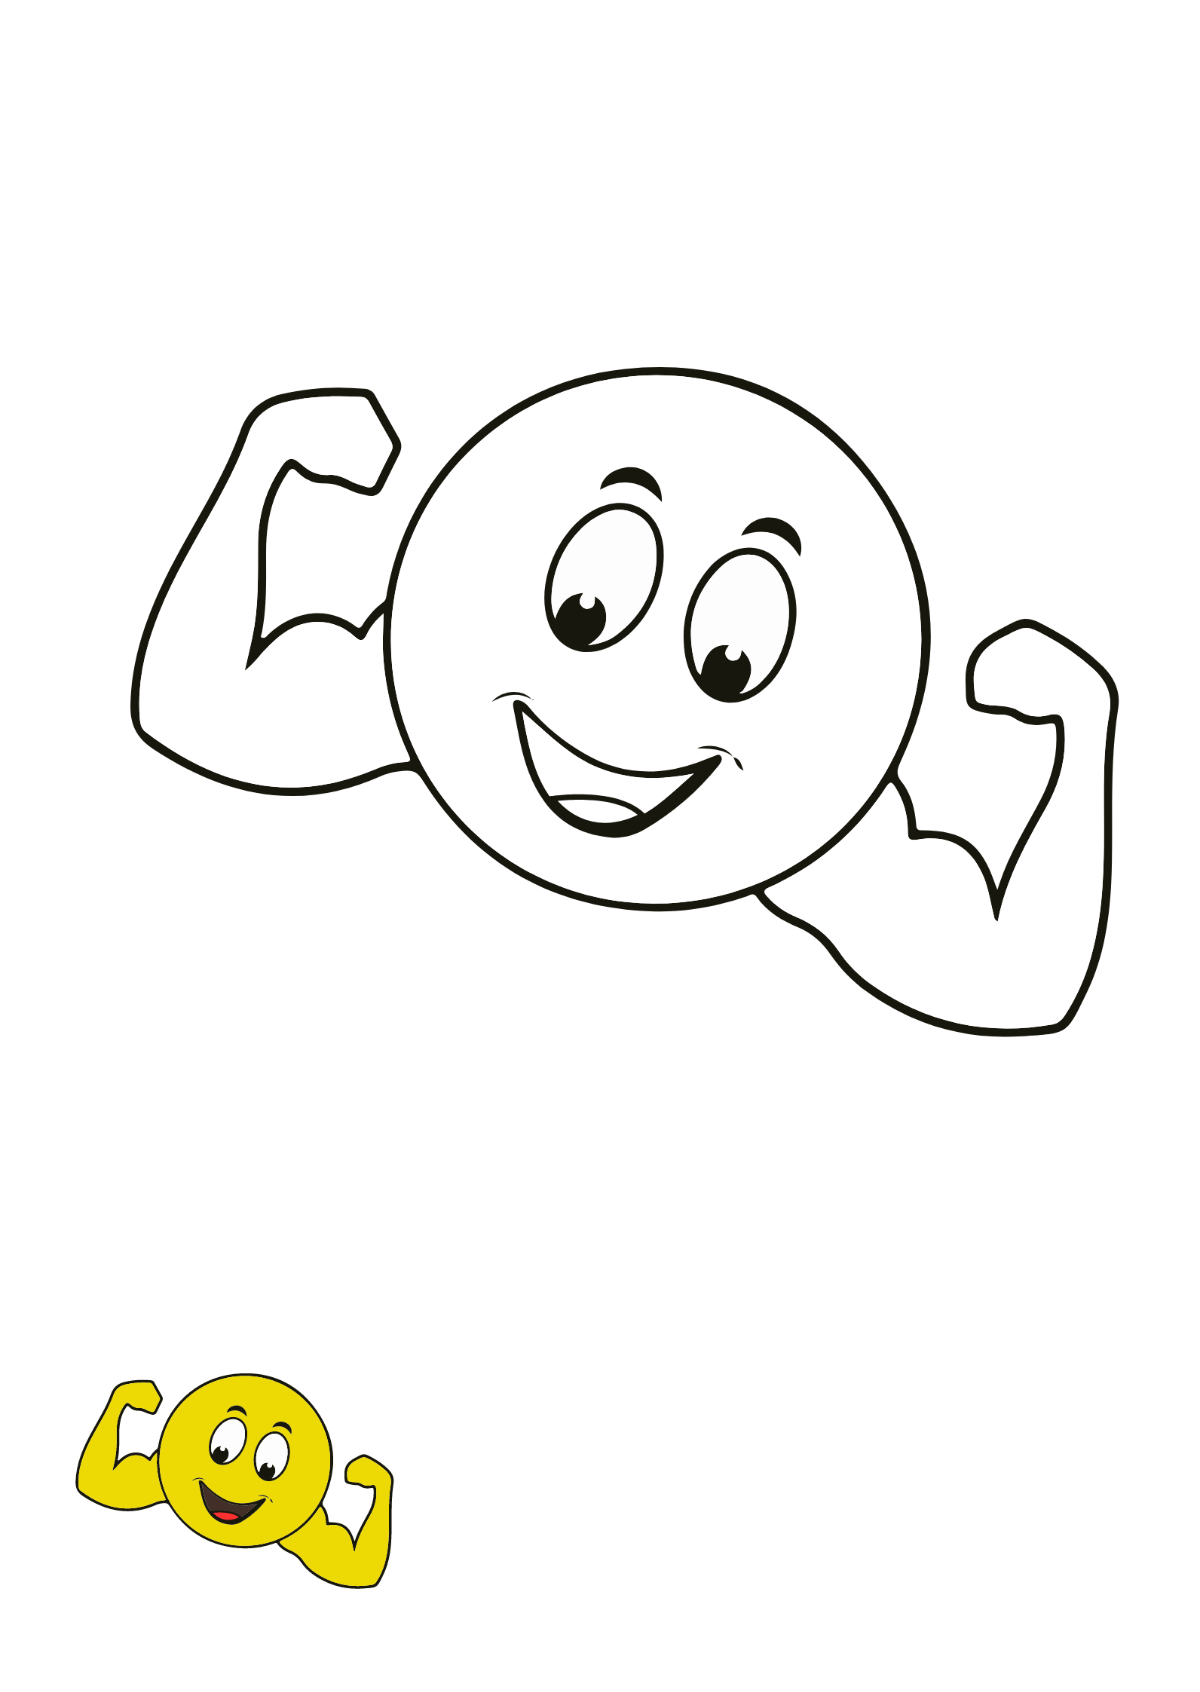 Free Healthy Smiley coloring page Template